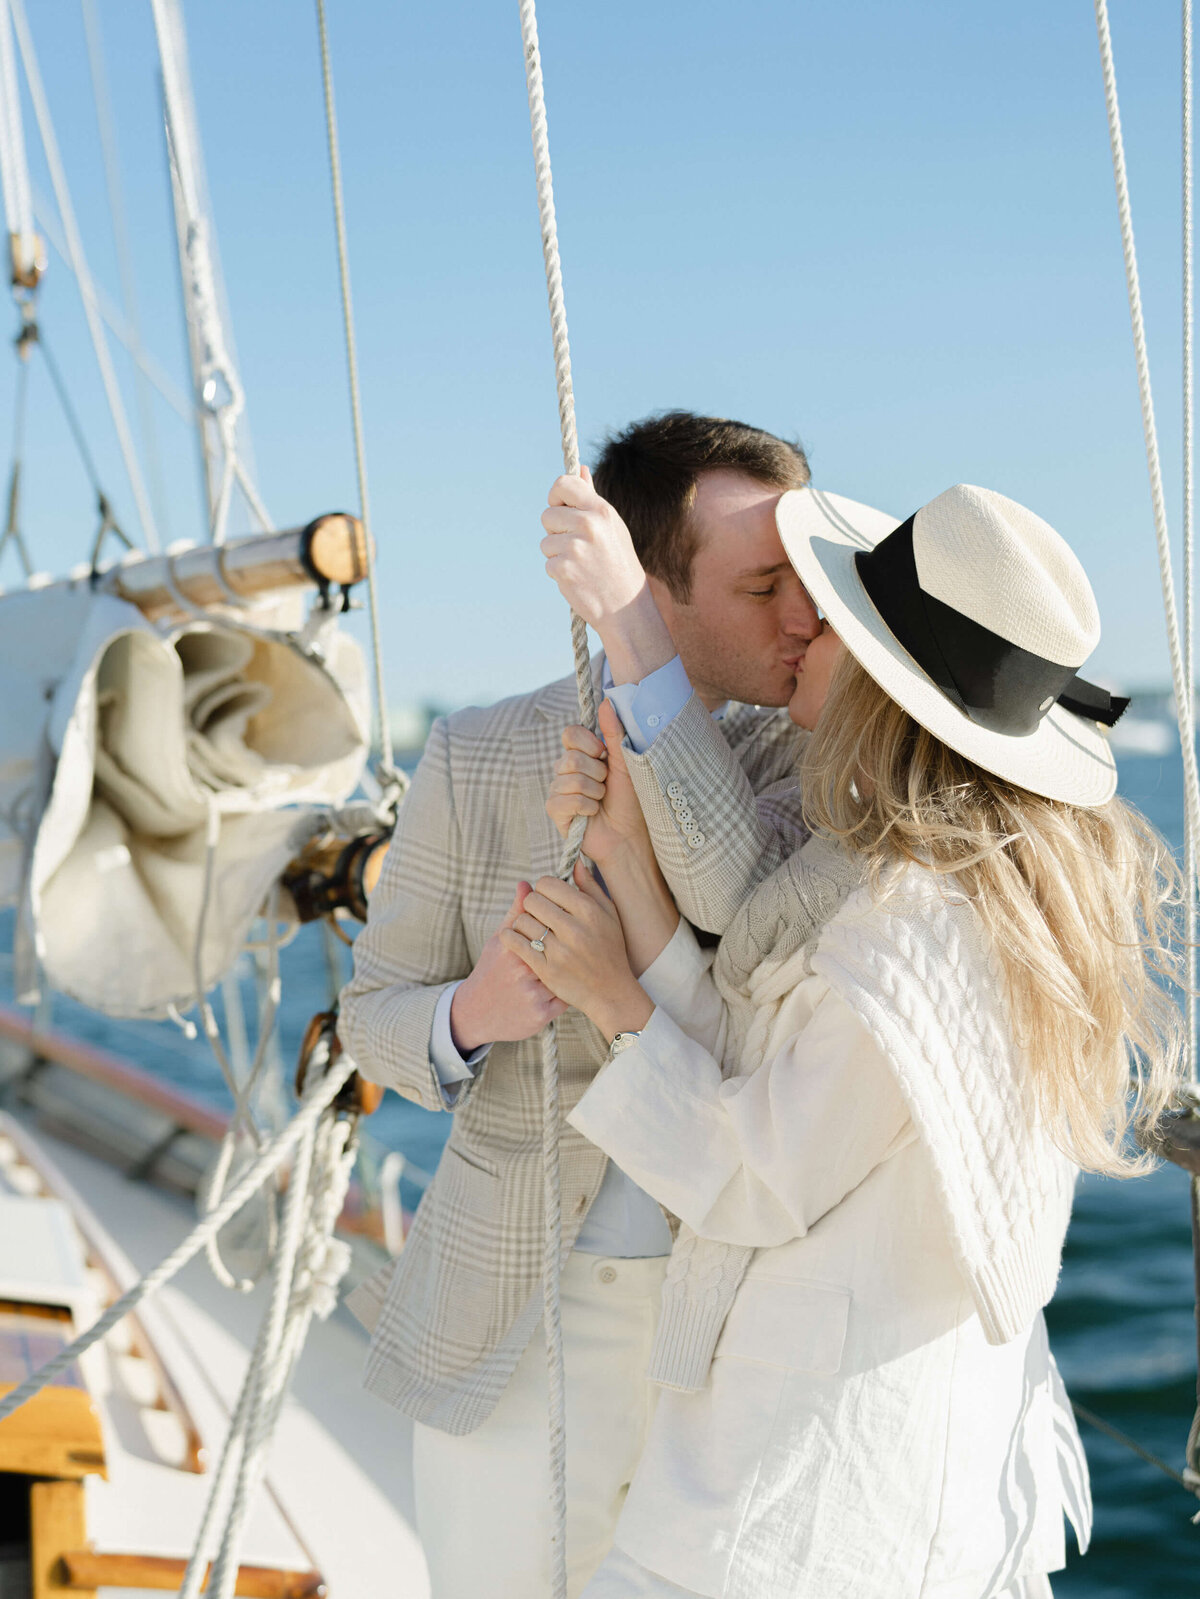 26-KT-Merry-photography-maine-engagement